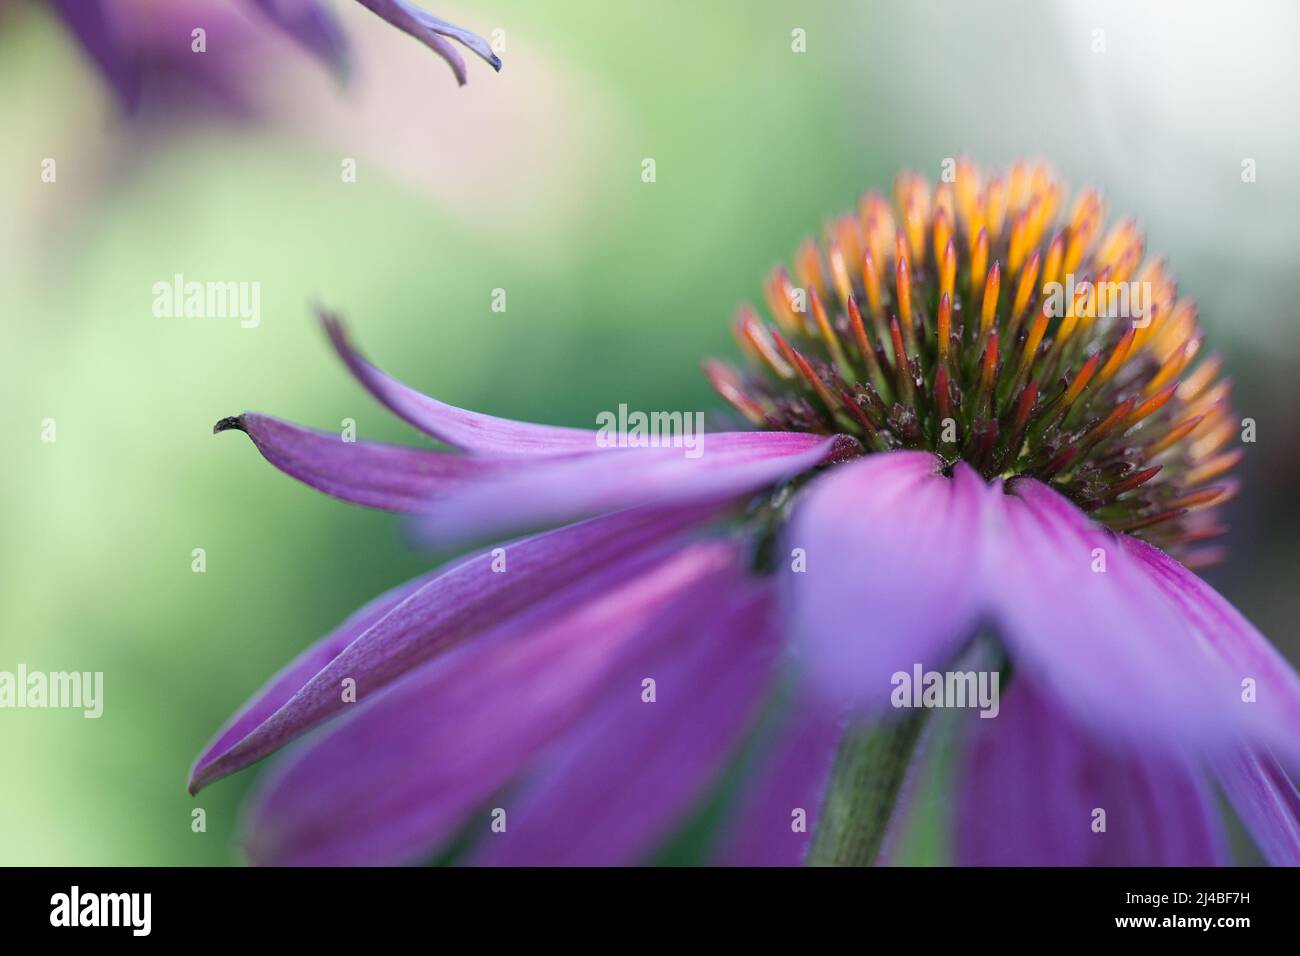 Violet and blur strokes of the flower Echinacea in a green background Stock Photo